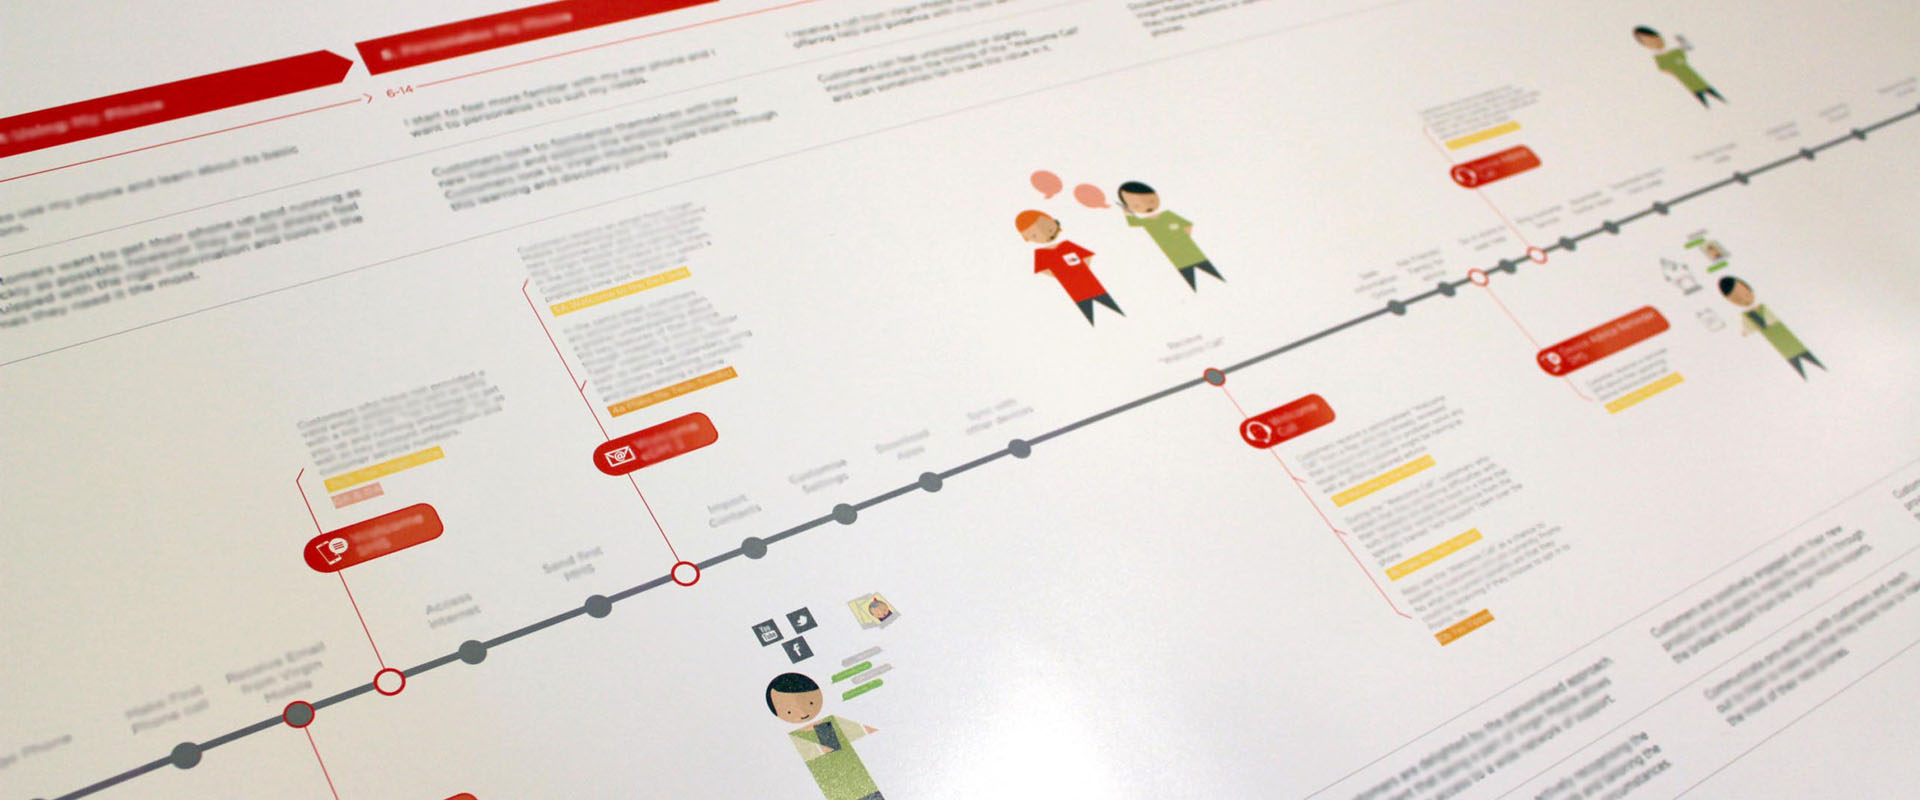 Detail of a Customer Journey Map